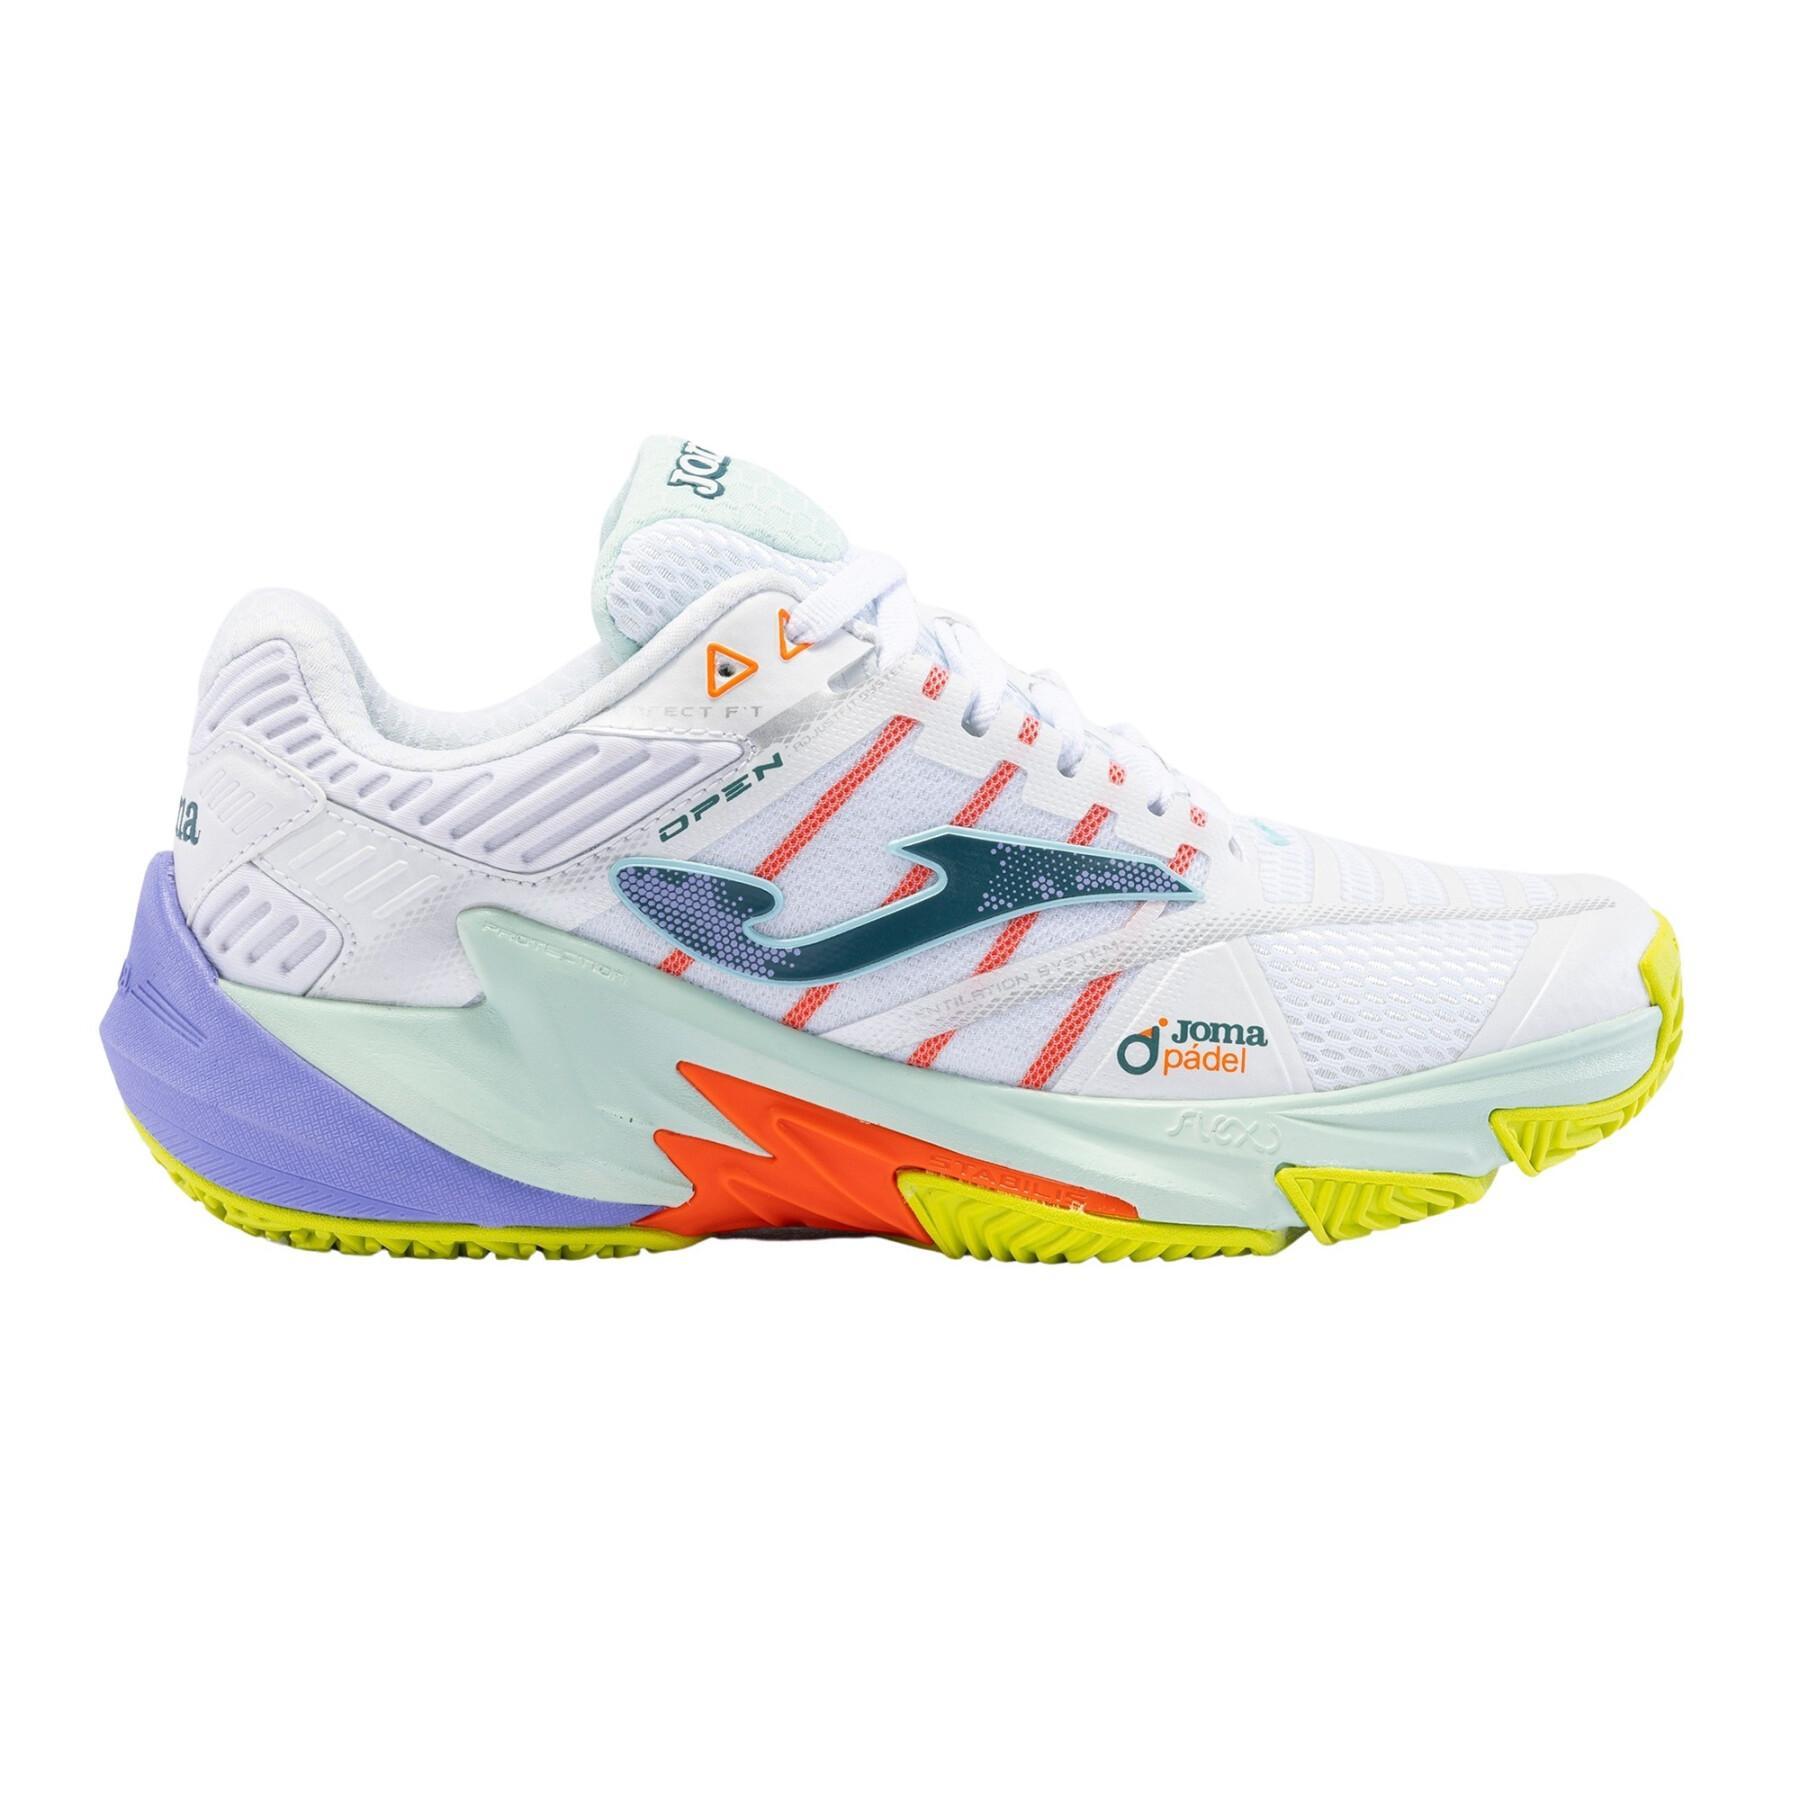 Women's paddle shoes Joma Open 2402